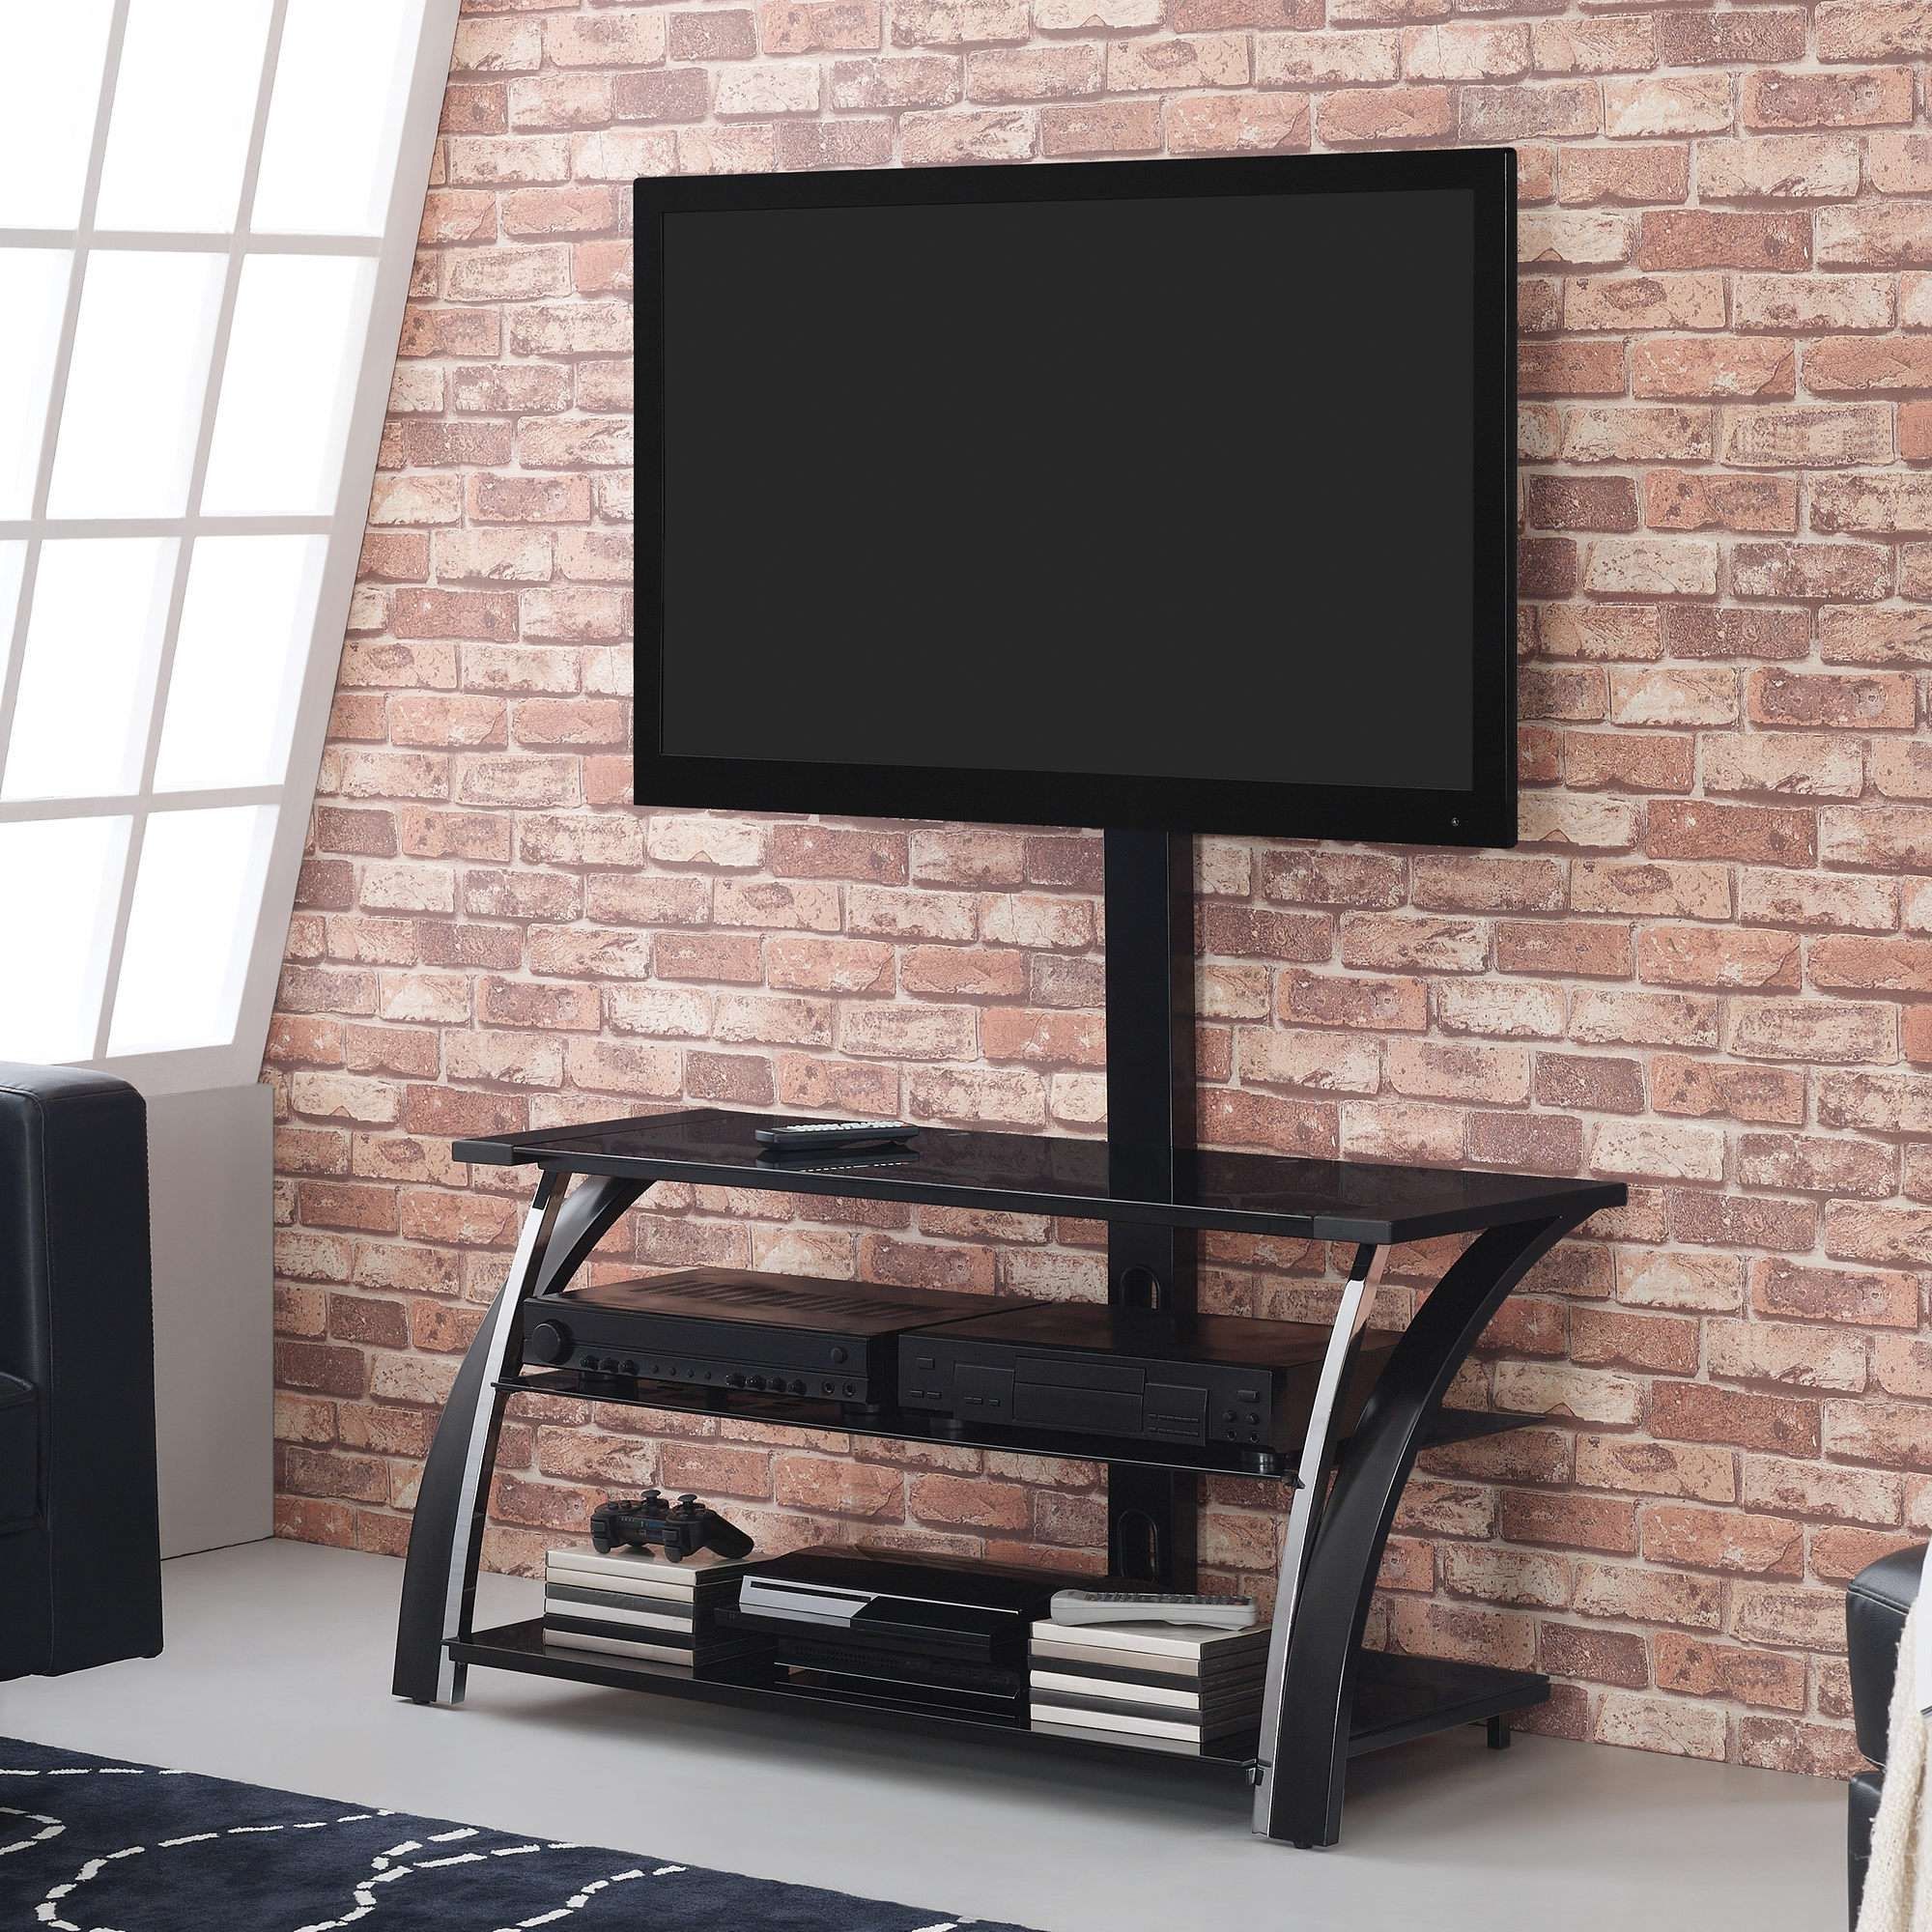 Trend Bjs Tv Stand 89 In Home Design Ideas With Bjs Tv Stand Inside Bjs Tv Stands (View 1 of 20)